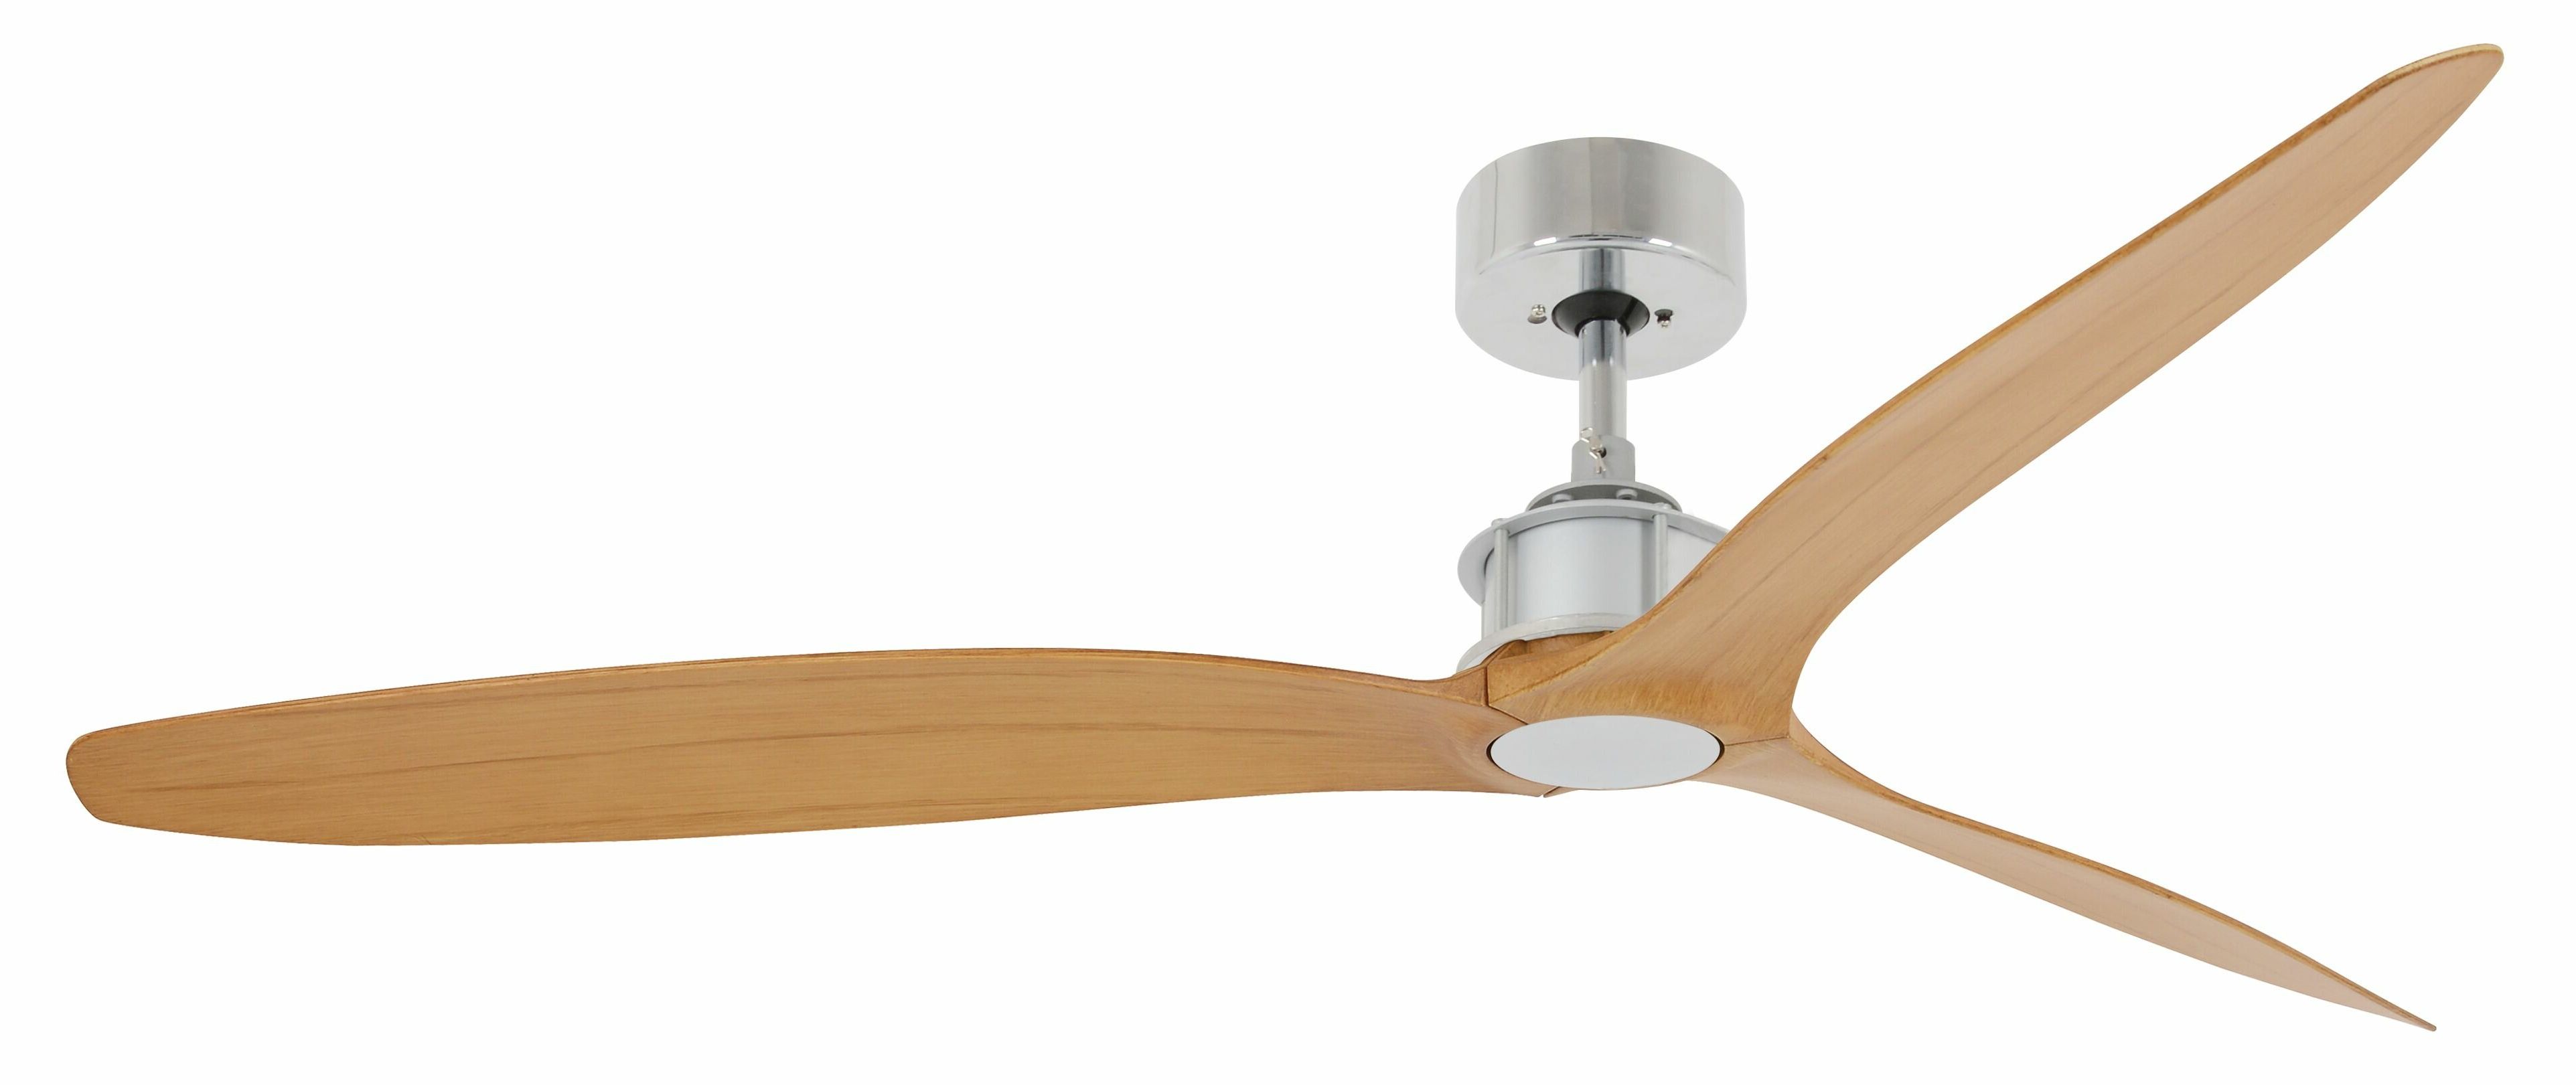 Theron Catoe 3 Blade Ceiling Fans With Most Up To Date Theron 52" Catoe 3 Blade Ceiling Fan With Remote (Photo 4 of 20)